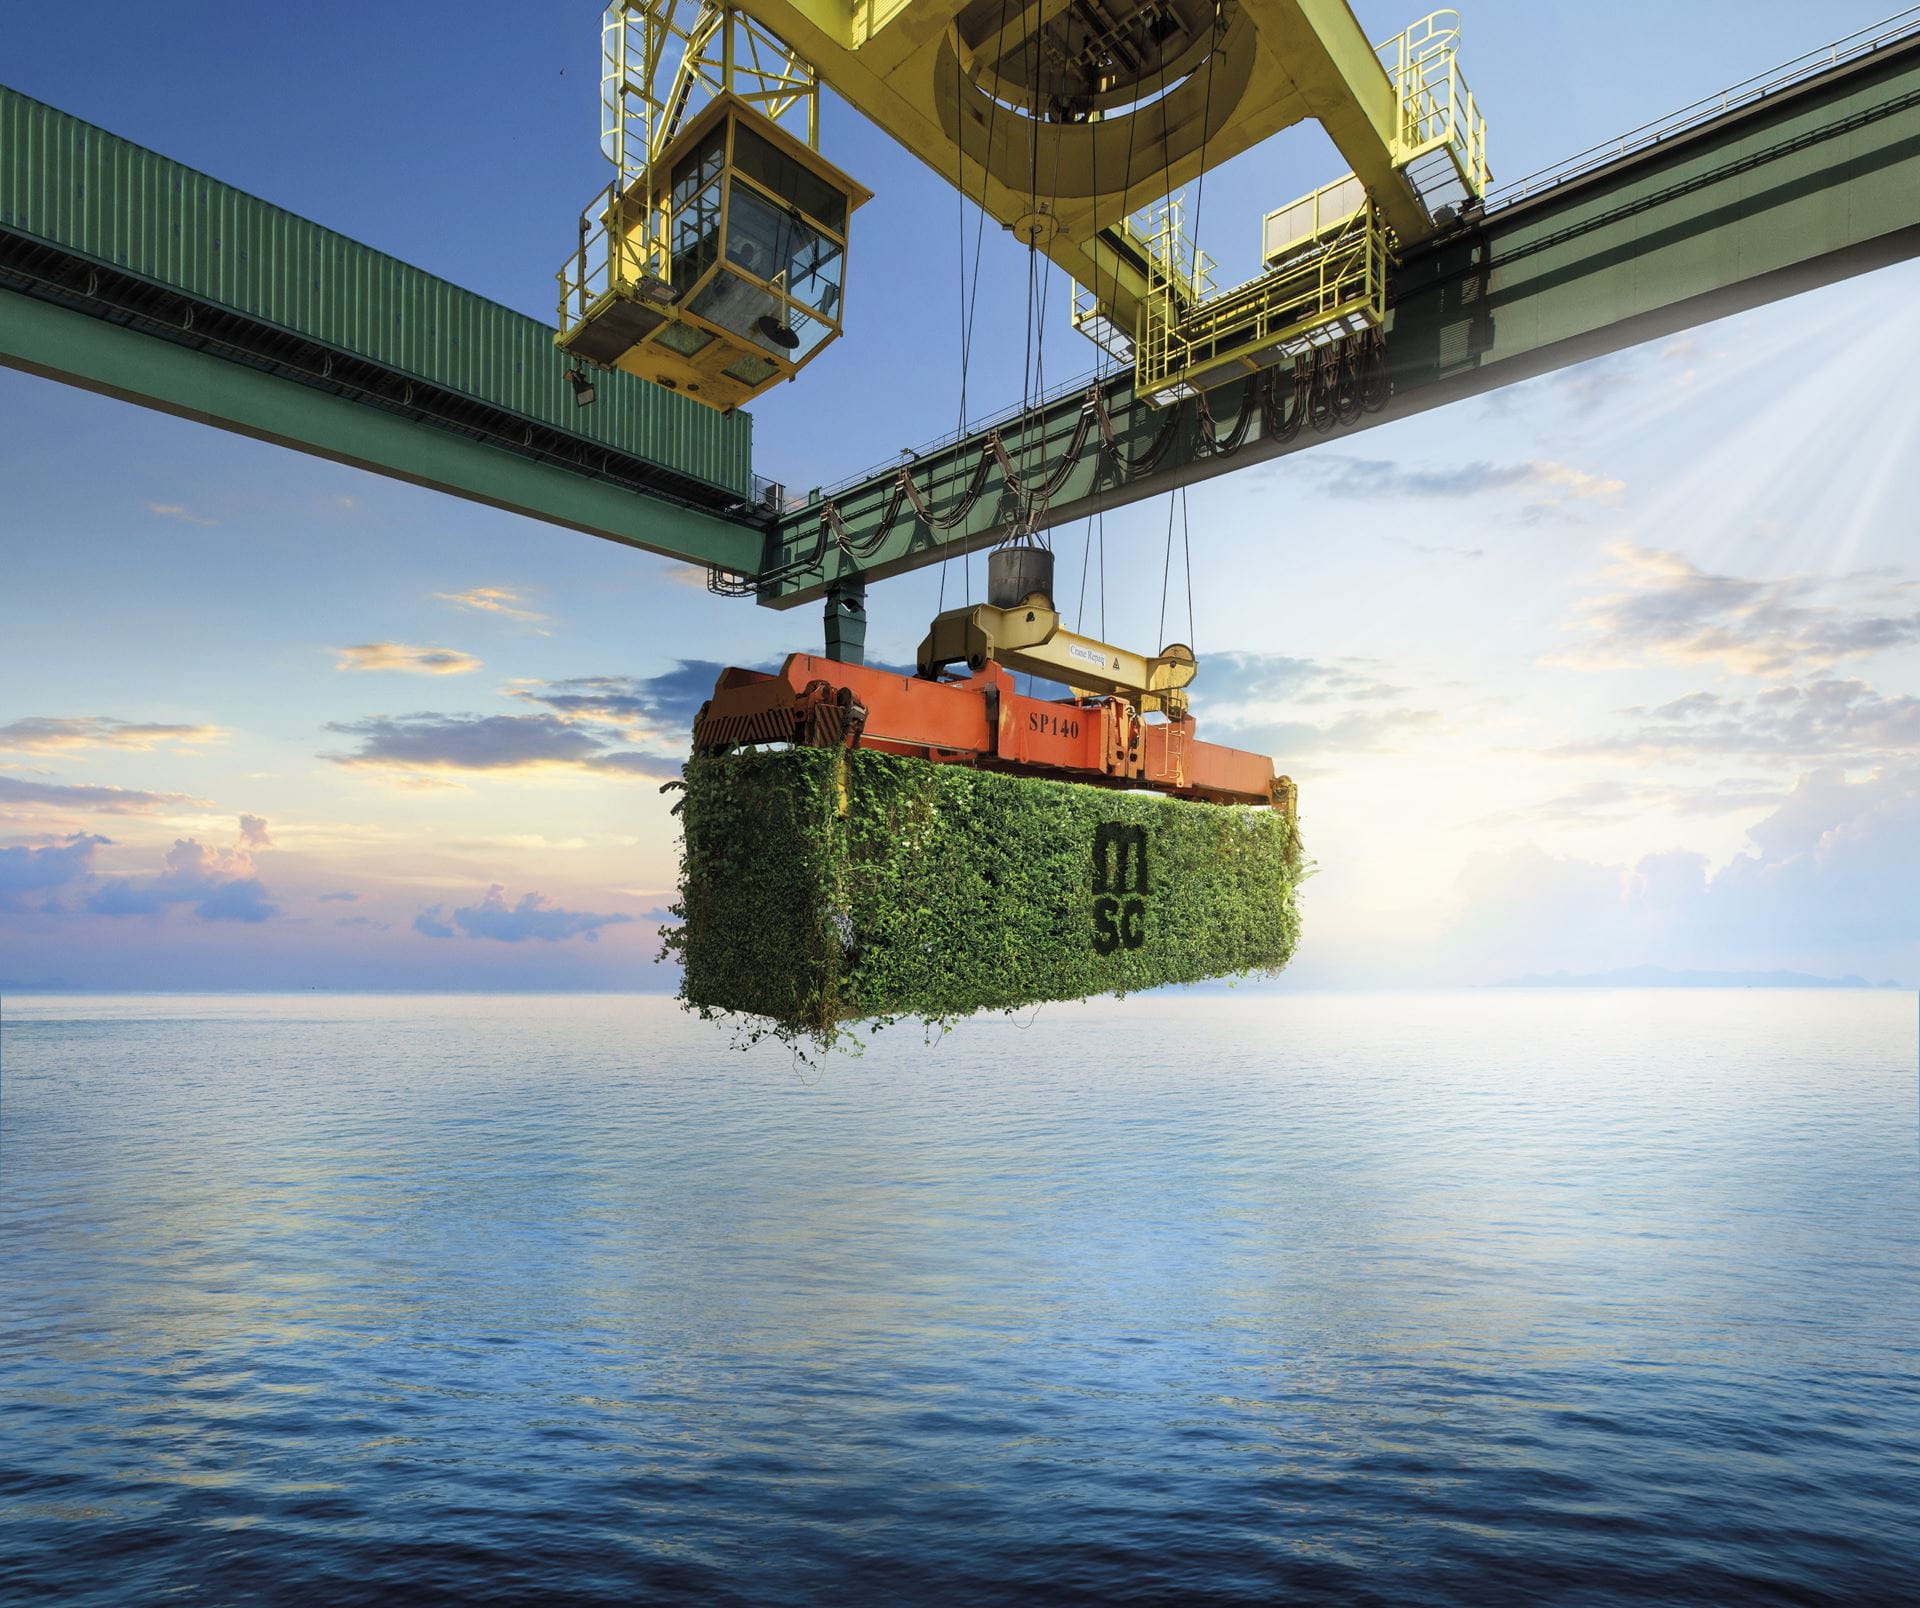 Green container lifted by a crane